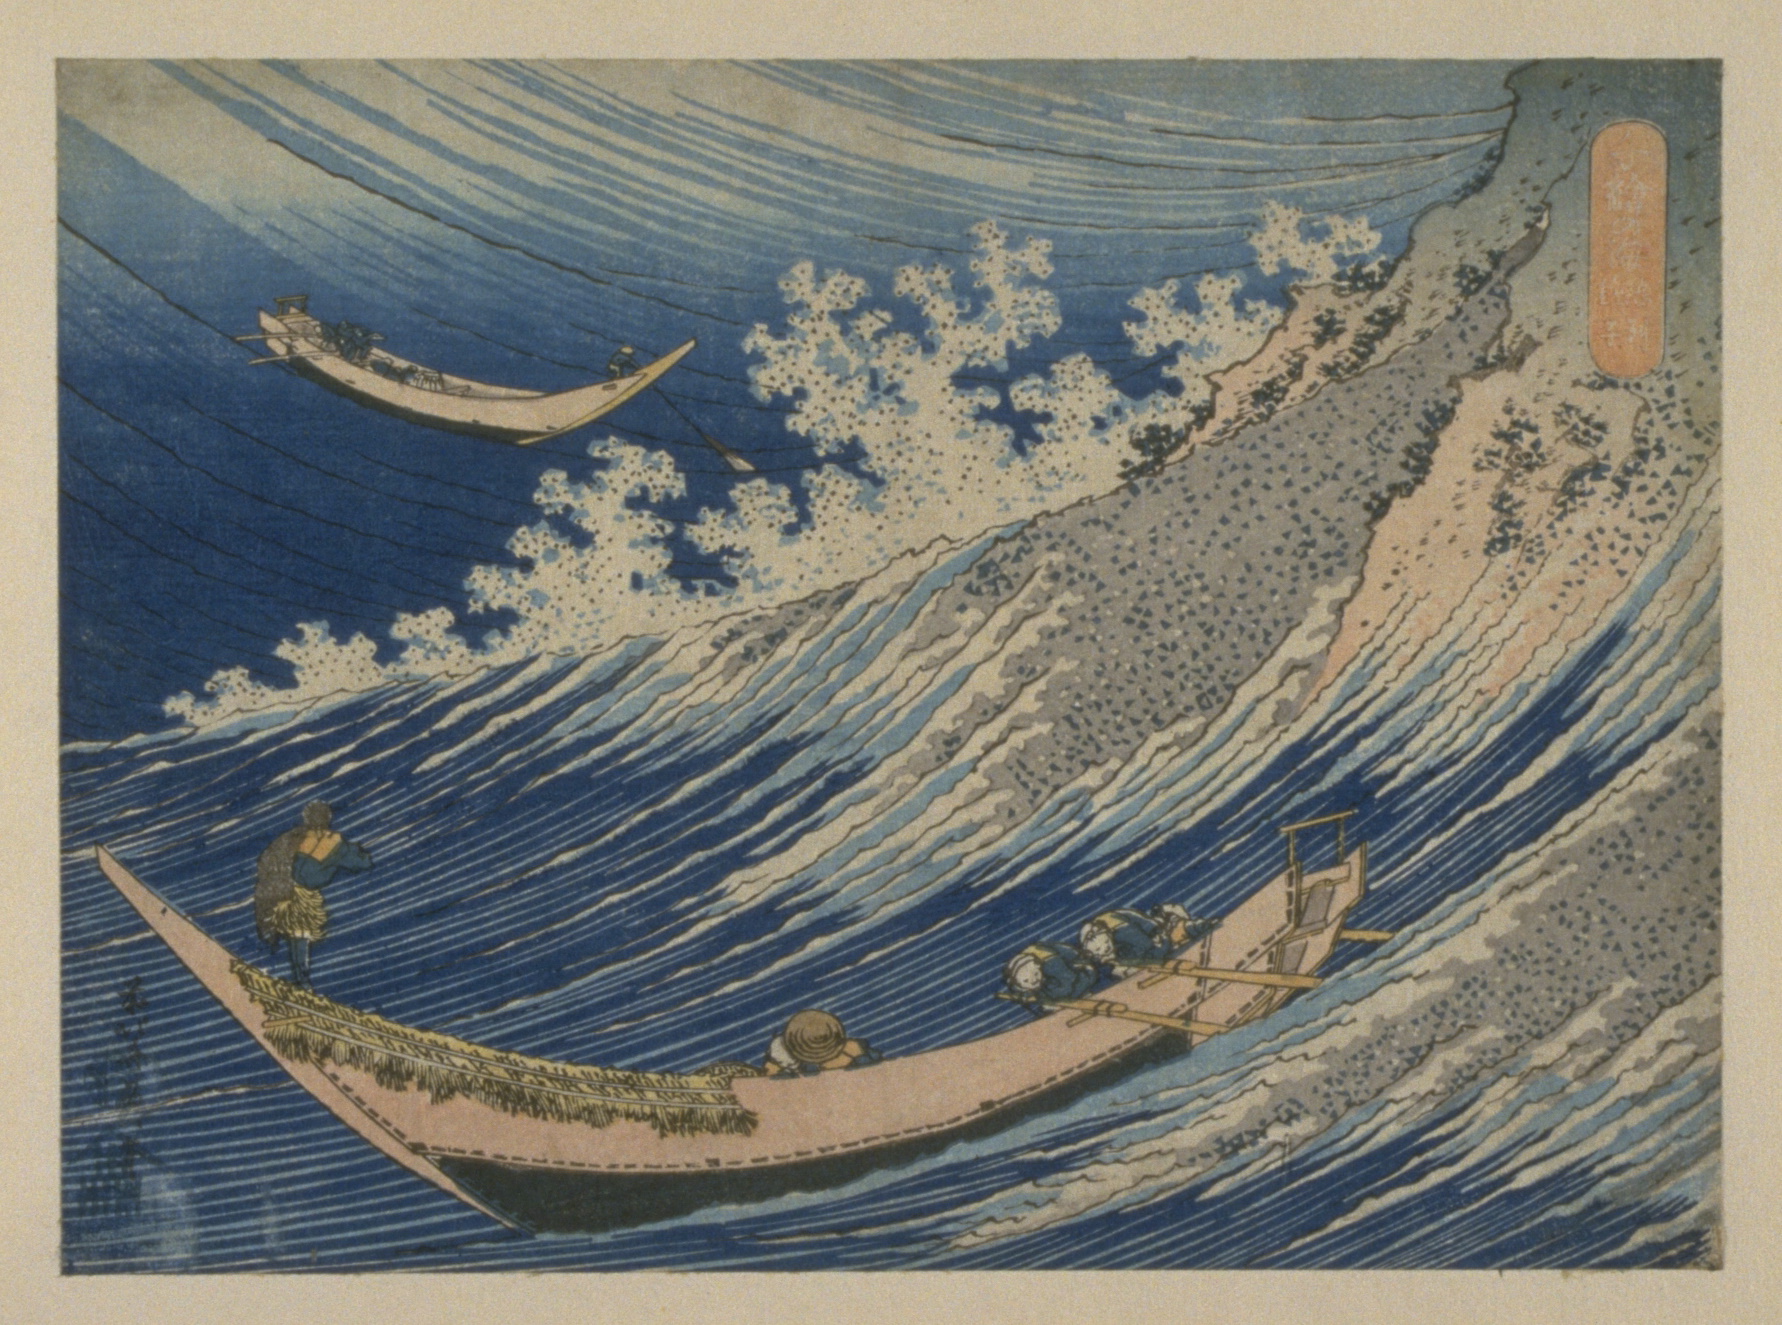 Artwork titled: Boats in a Tempest in the Trough of the Waves off the Coast of Choshi